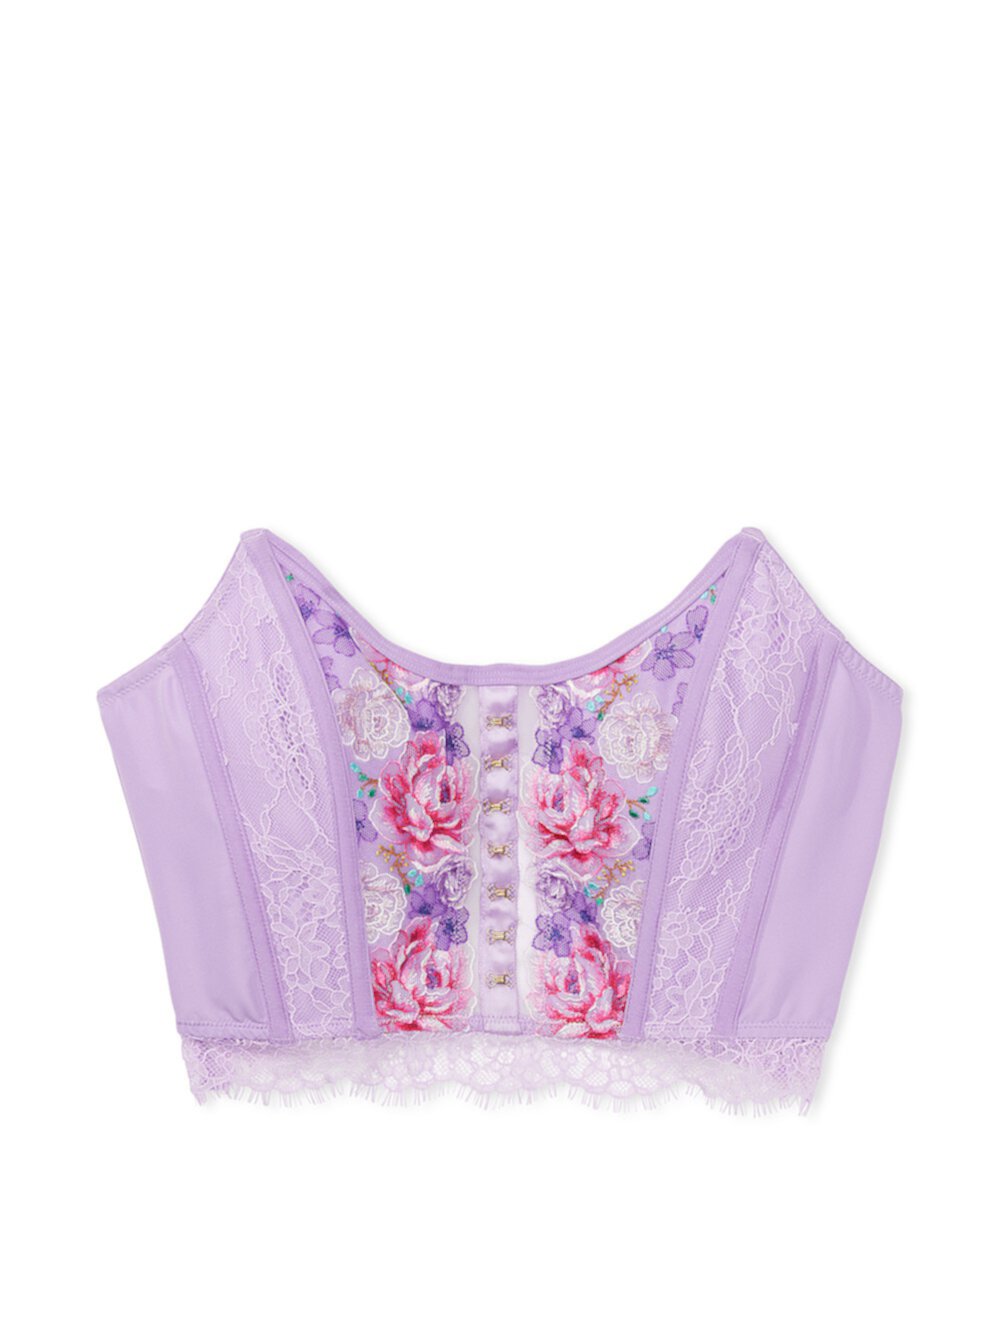 Floral Embroidery Strapless Corset Top Dream Angels